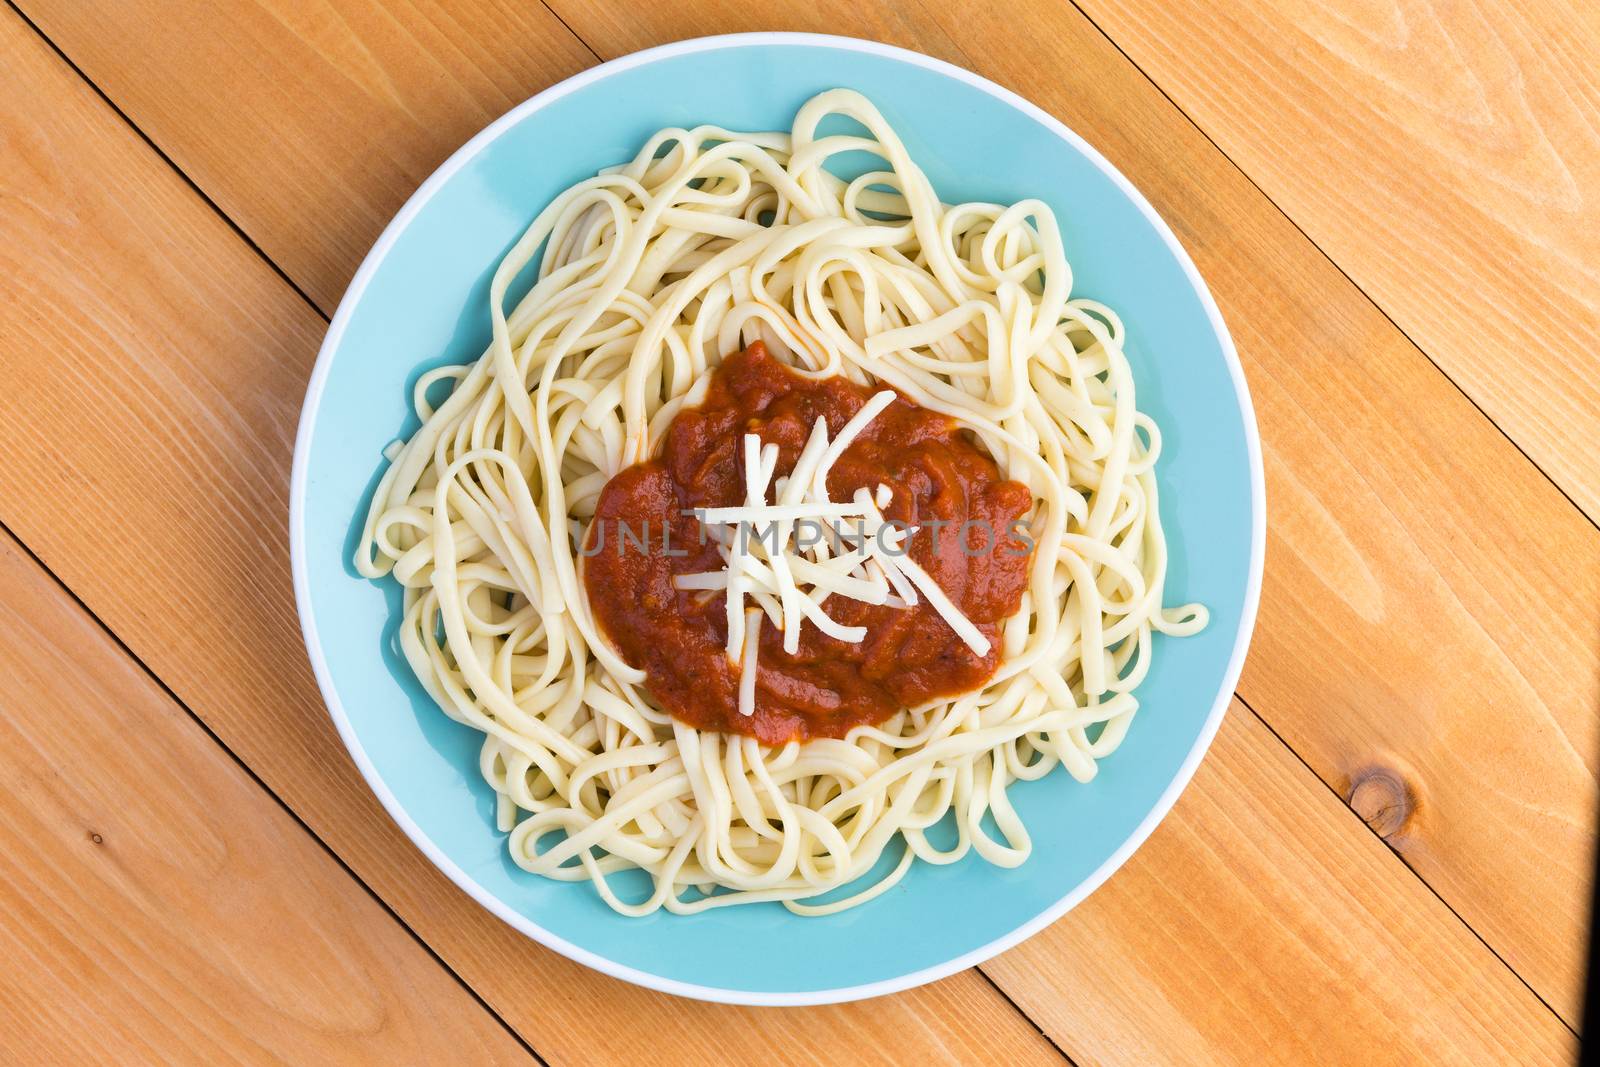 Simple plate of Italian spaghetti Bolognese by coskun